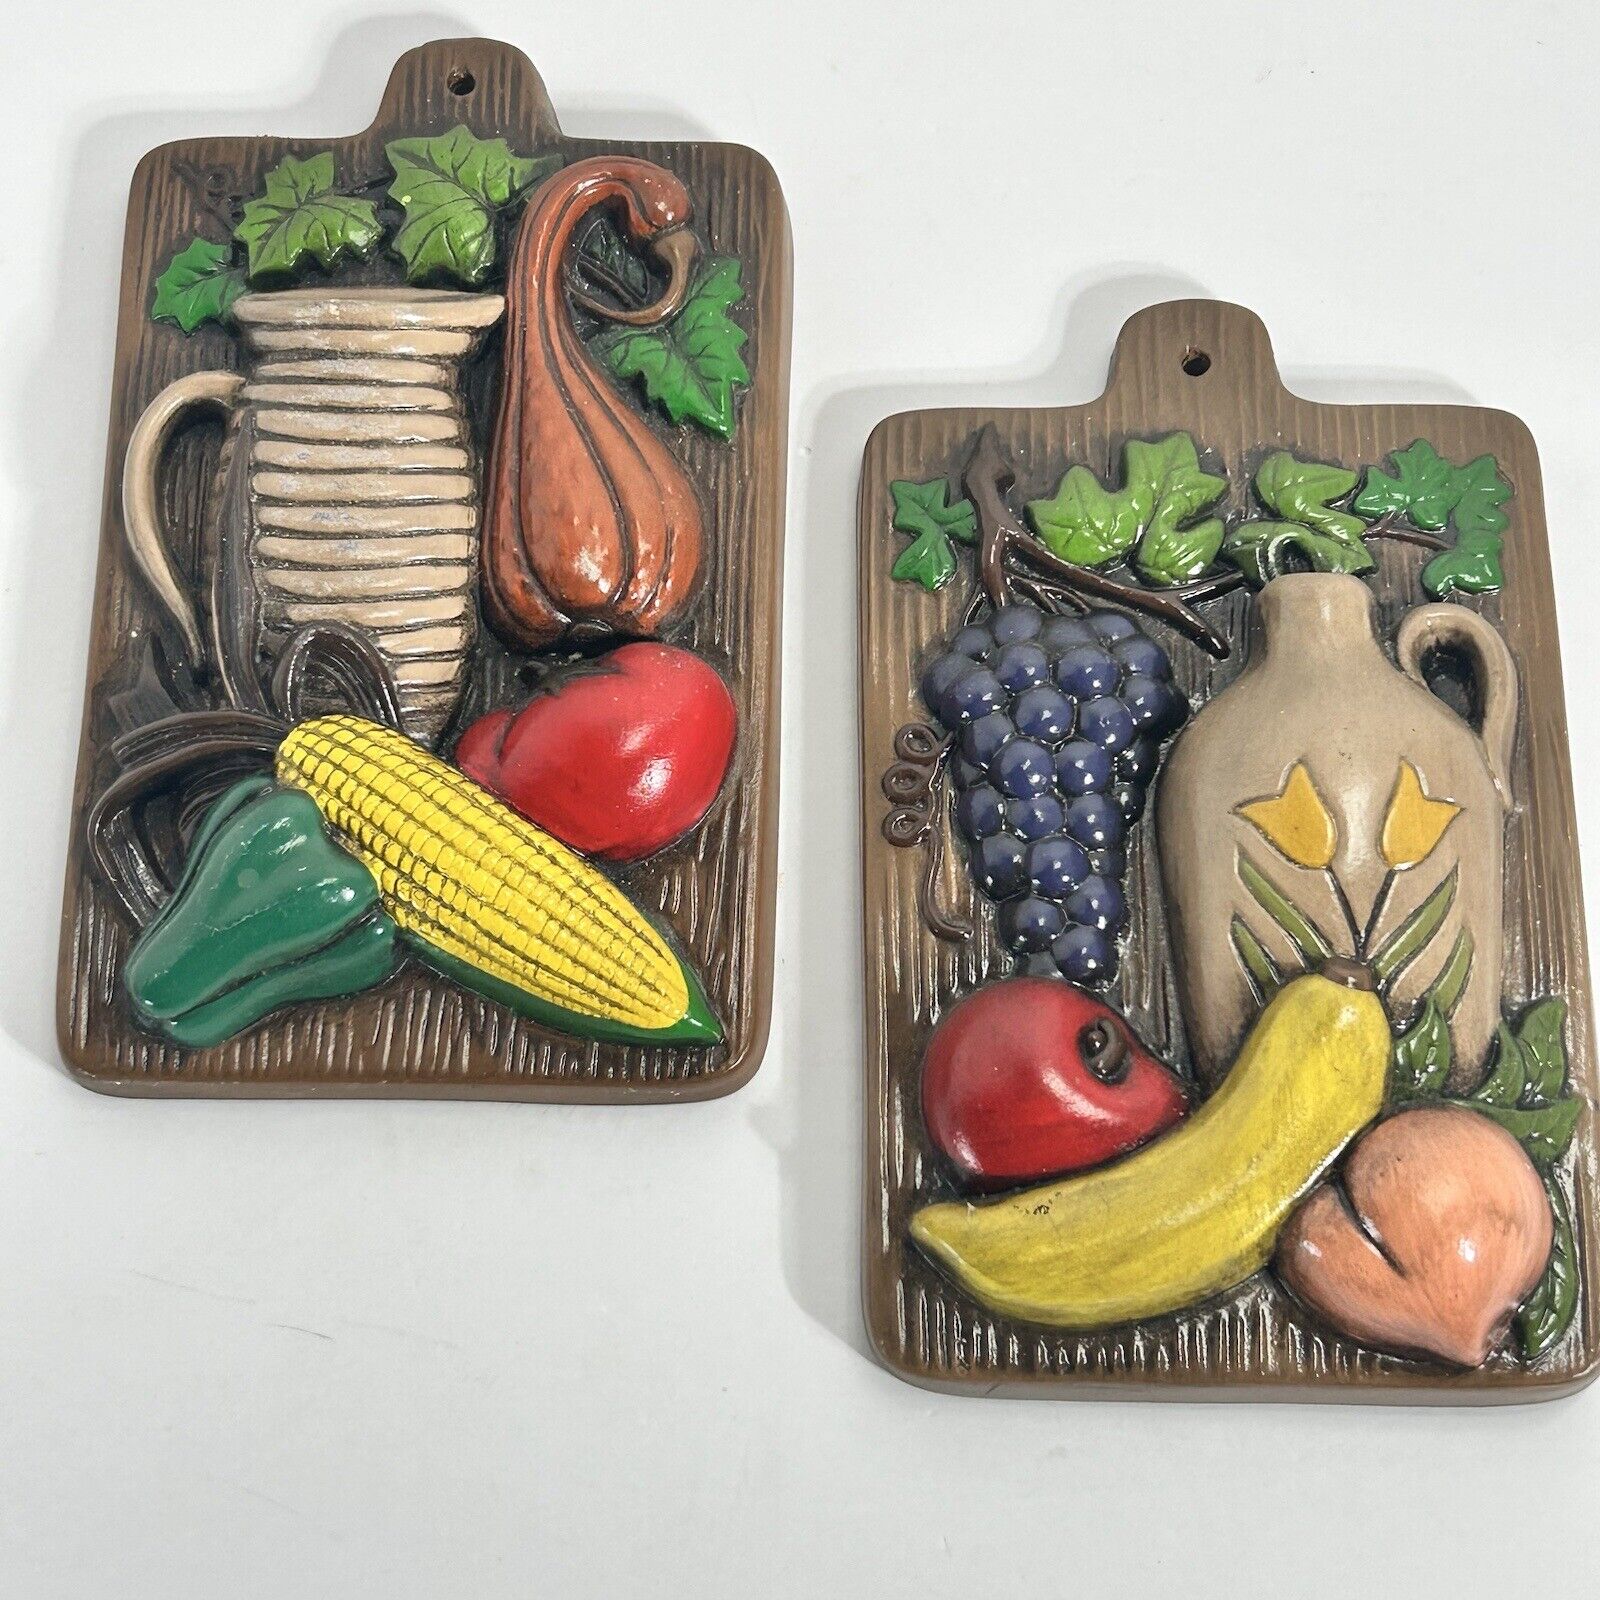 Vibrant Vtg Chalkware Decorative Plaques Fruit and Veggies on Cutting Board 2 Pc